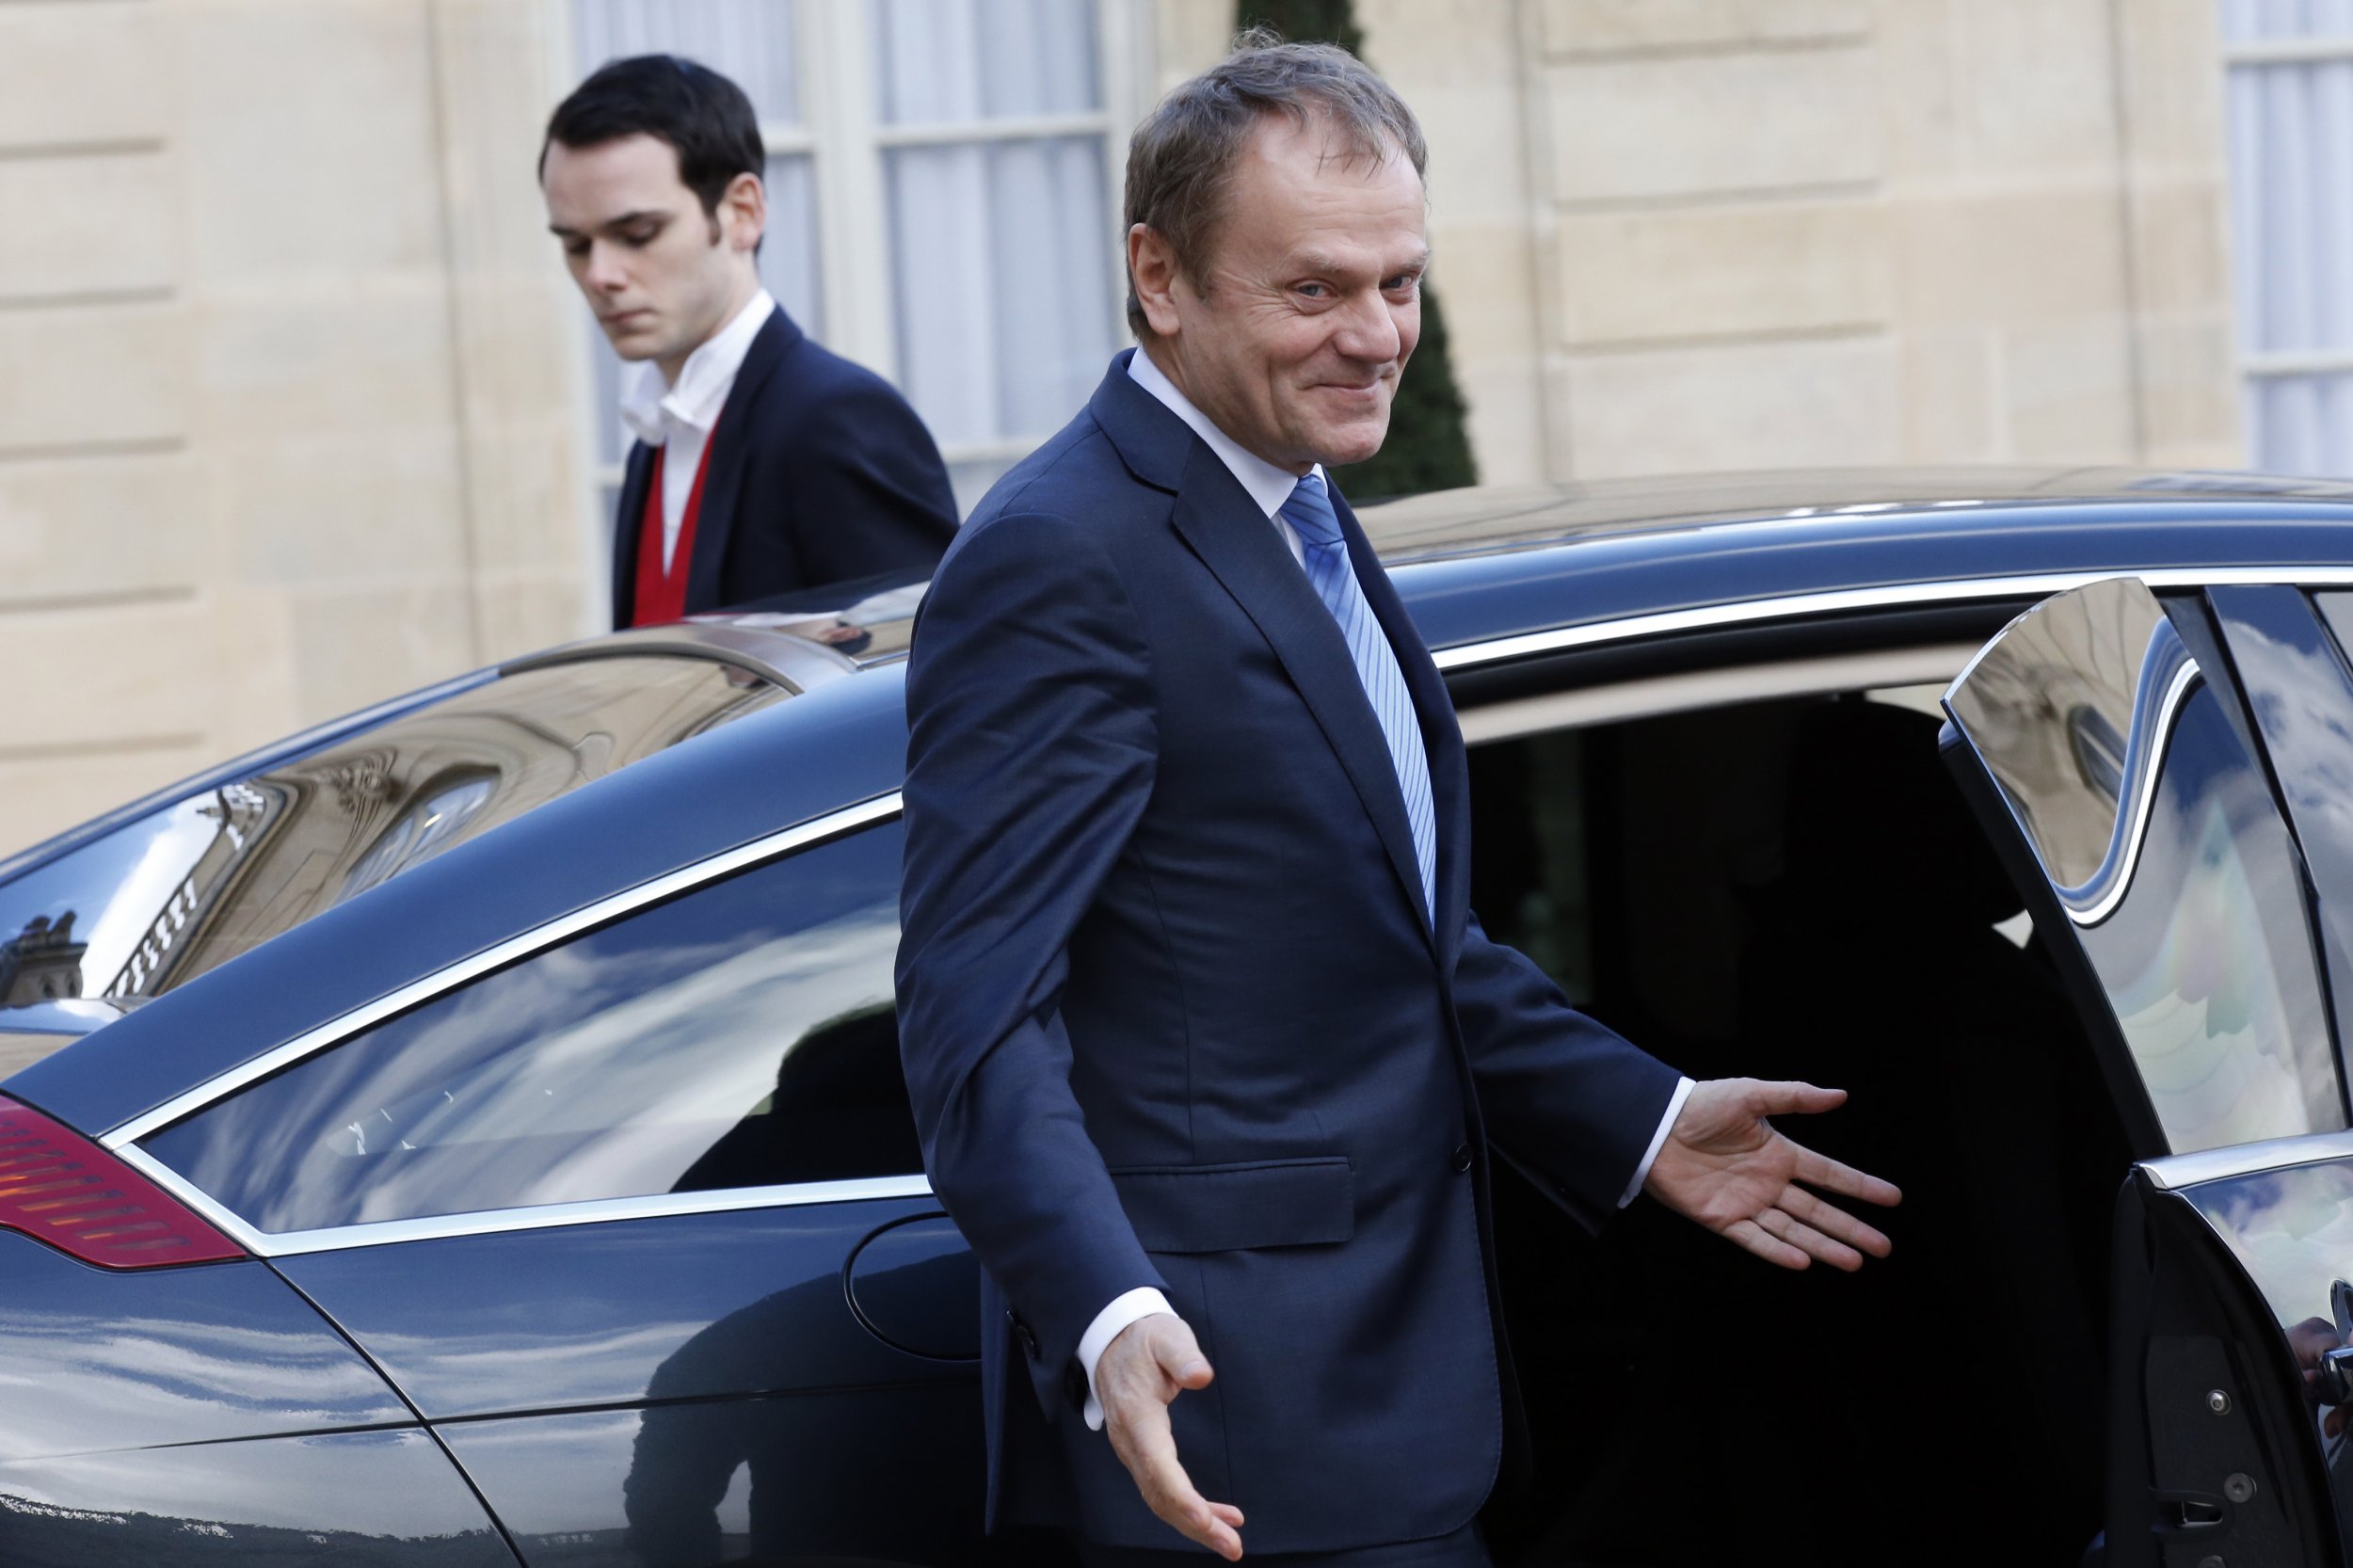 EU Council President Donald Tusk leaves the Elysee Palace in Paris.